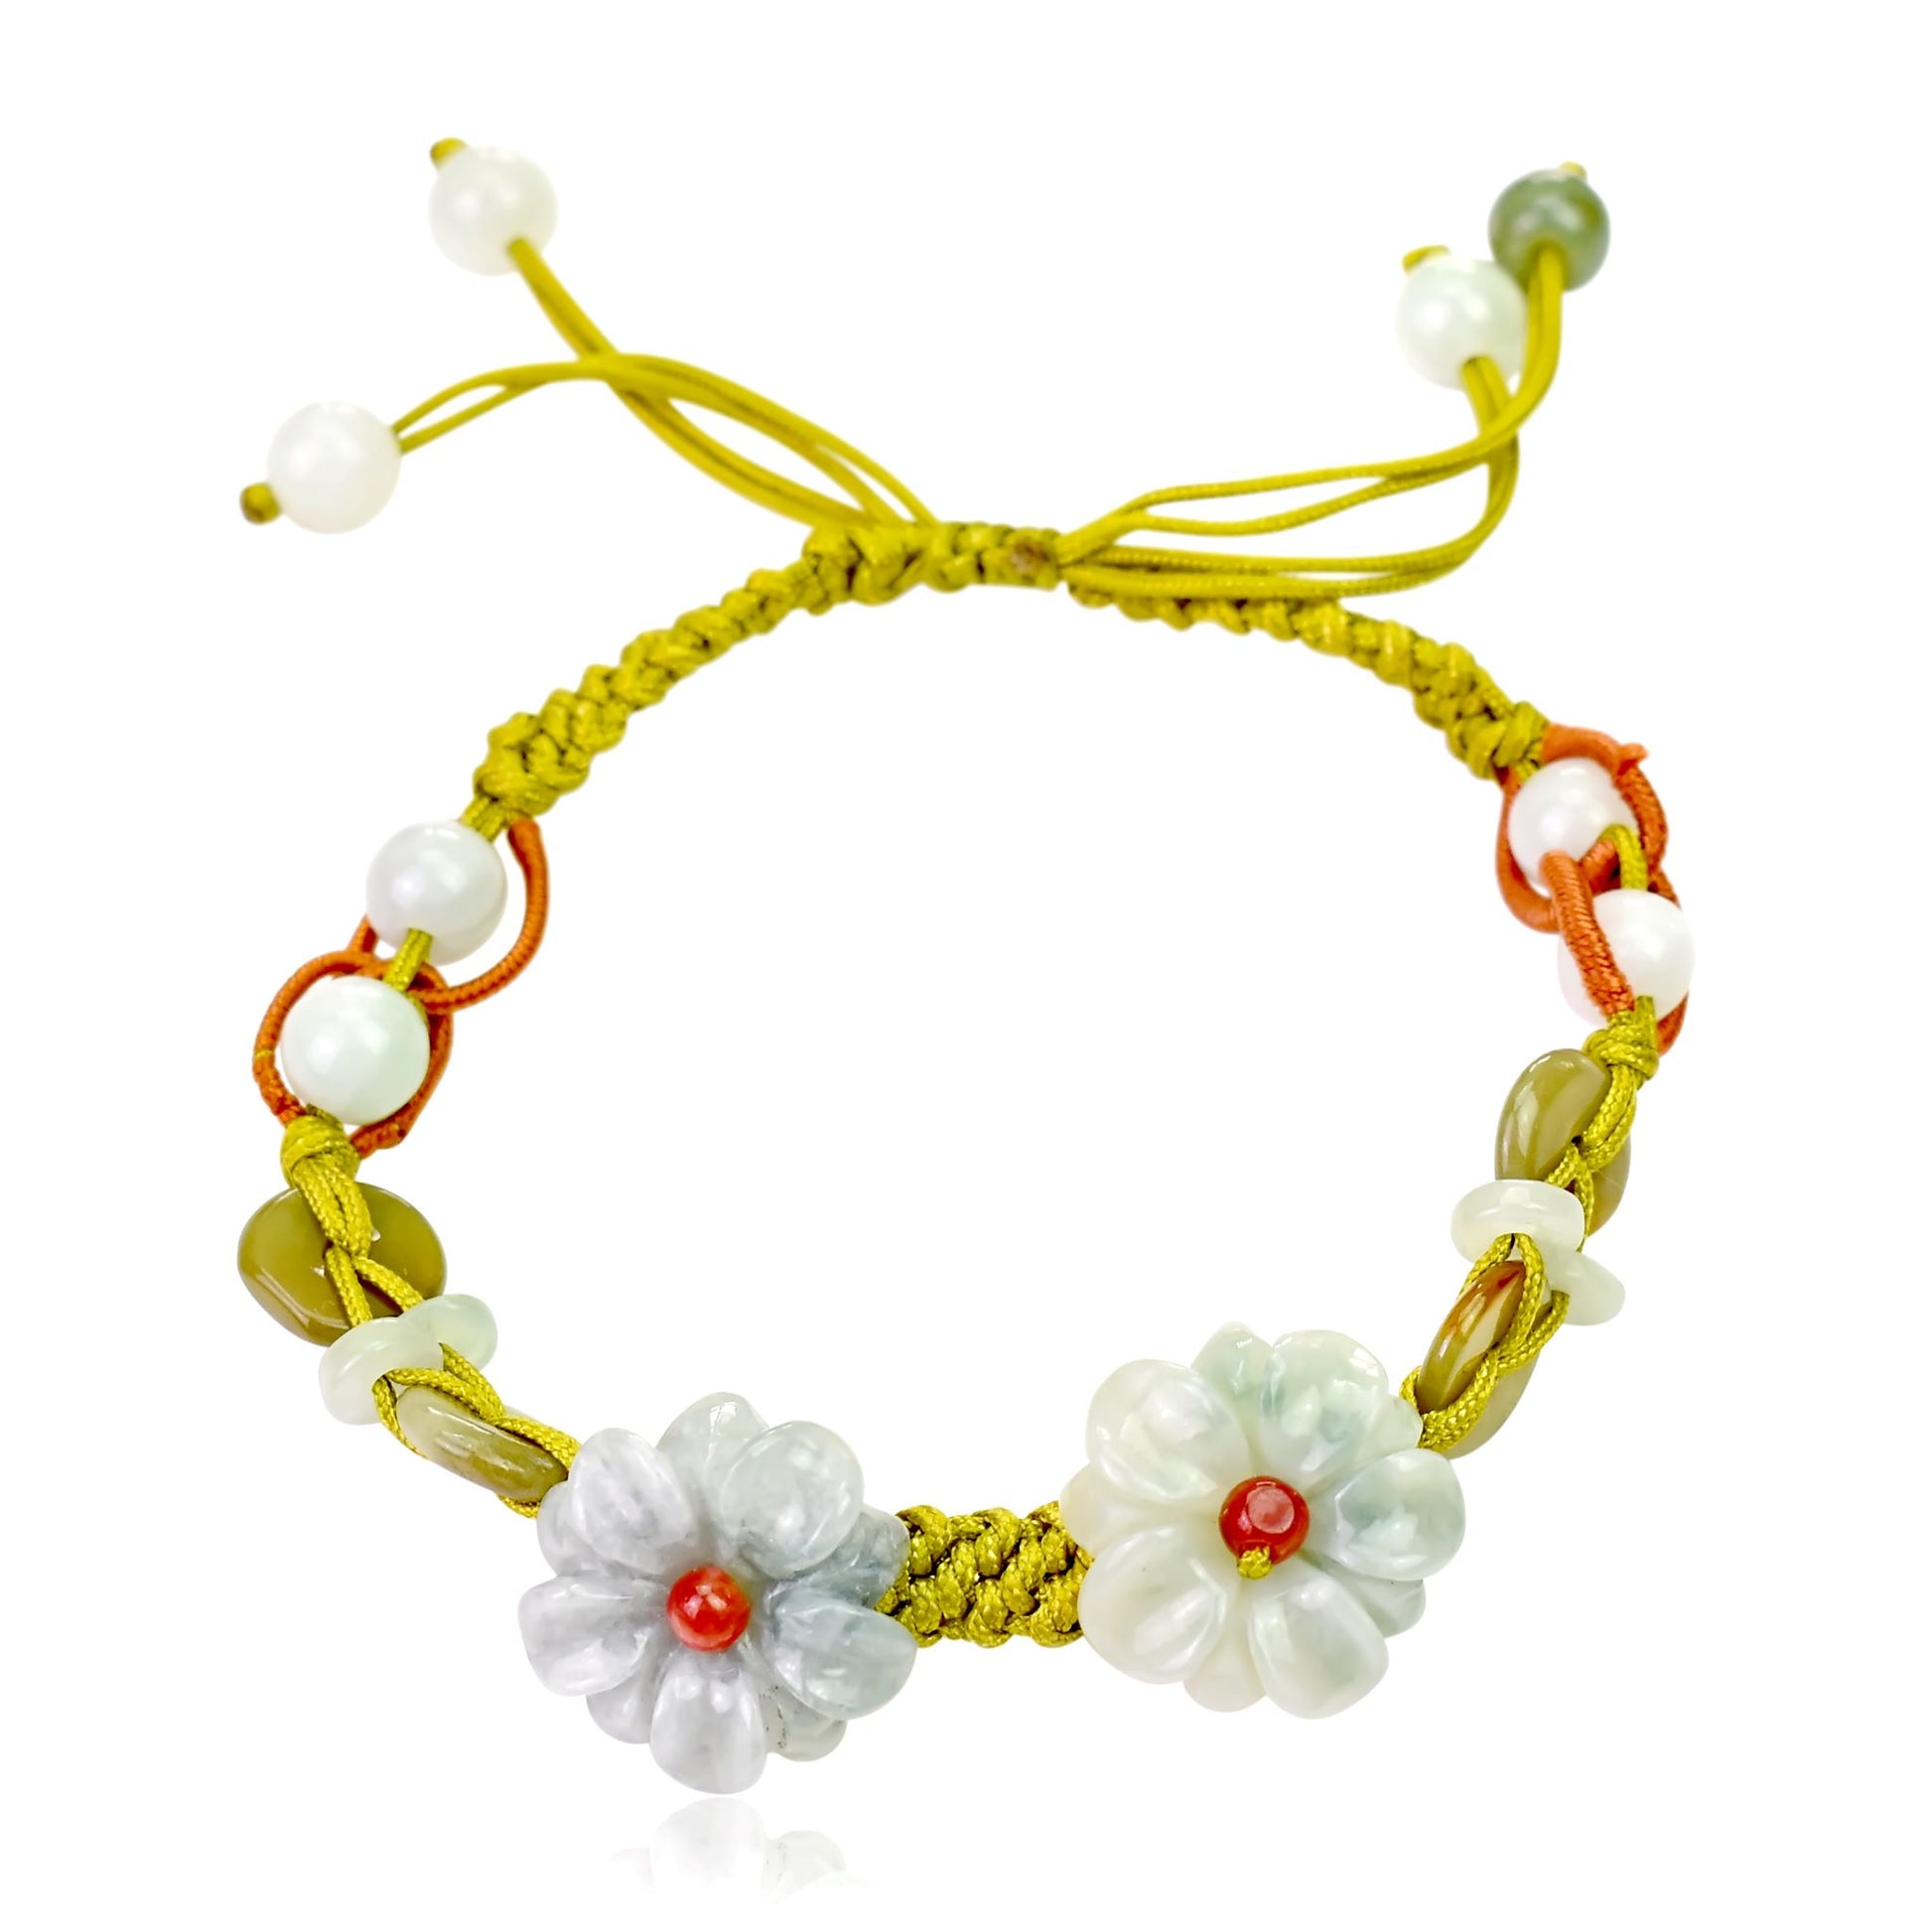 Be Uniquely Stylish with the Double Mums Adjustable Charm Bracelet made with Lime Cord